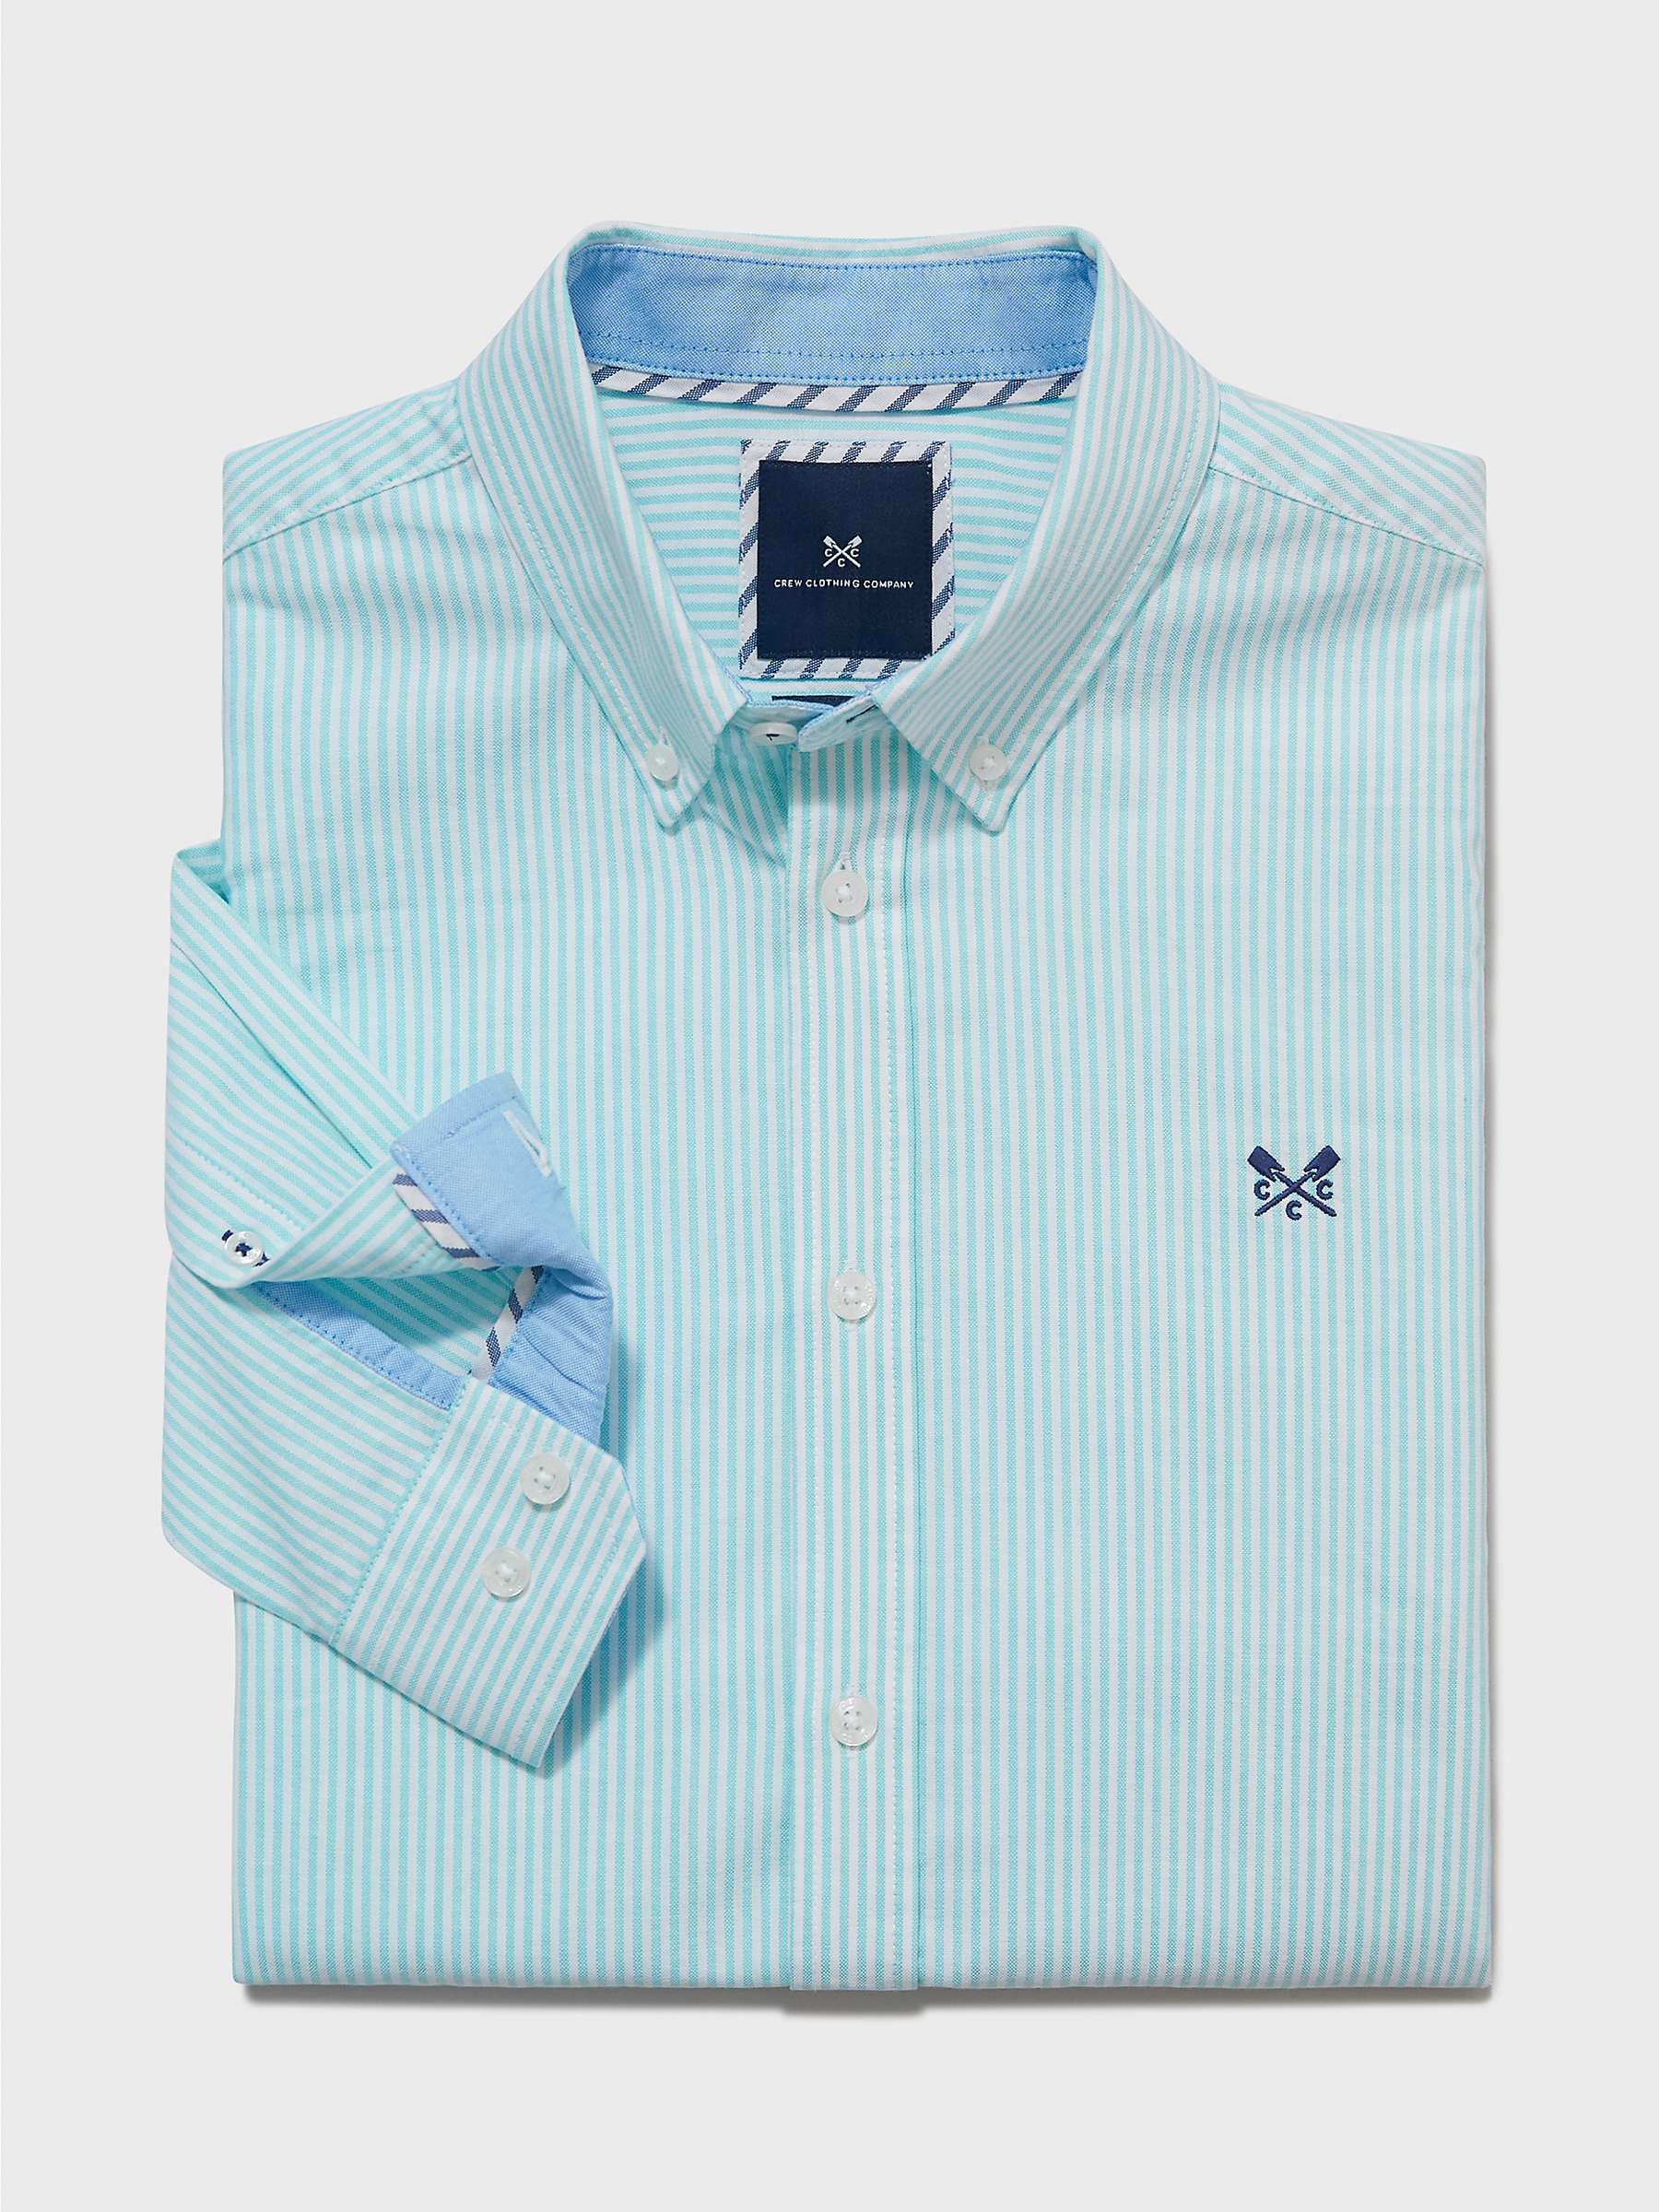 Buy Crew Clothing Slim Fit Long Sleeve Oxford Shirt, Mint Green Online at johnlewis.com